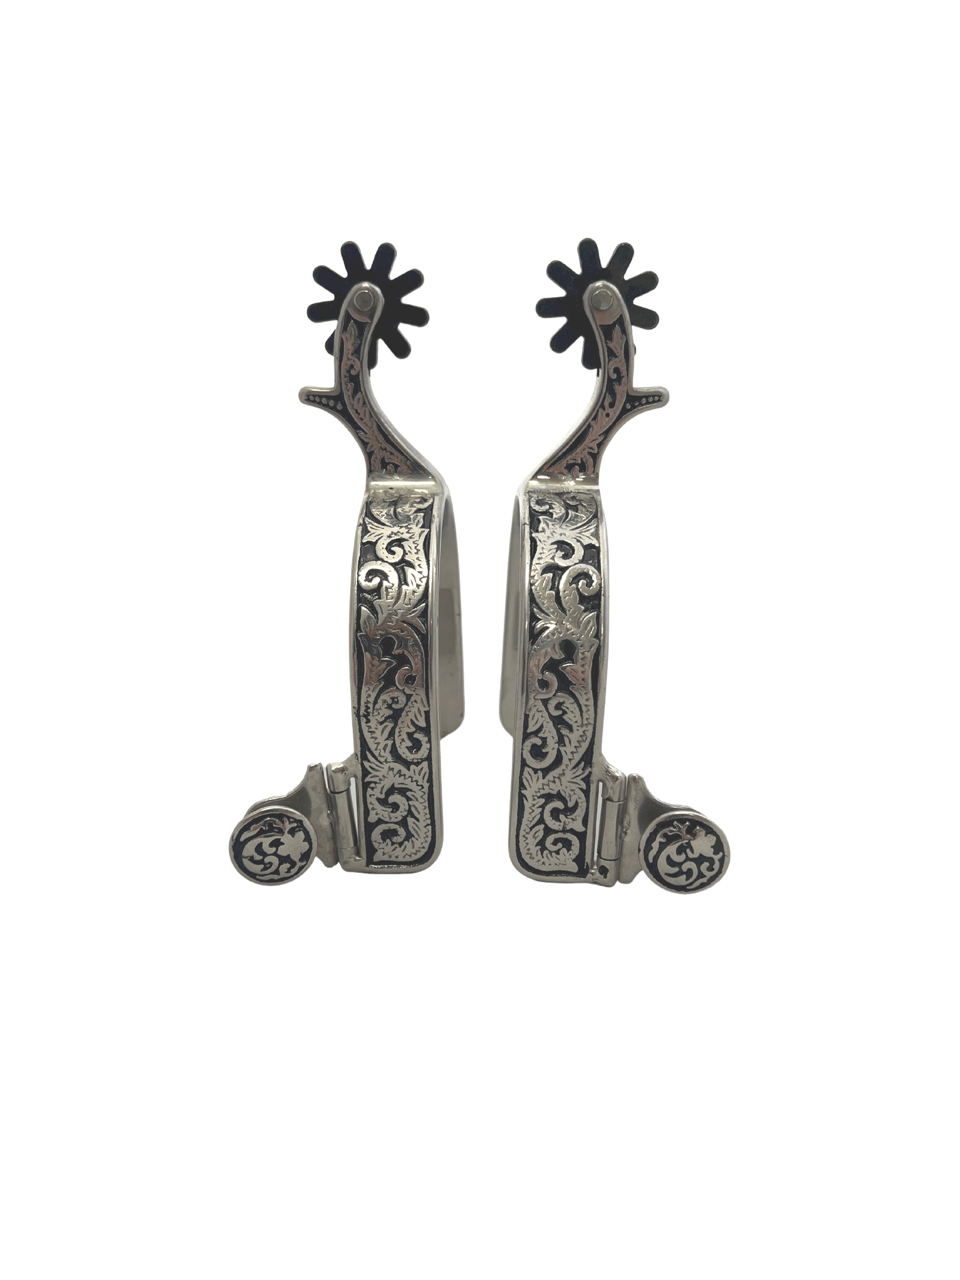 Formay Stainless Steel Floral Spurs - Mens